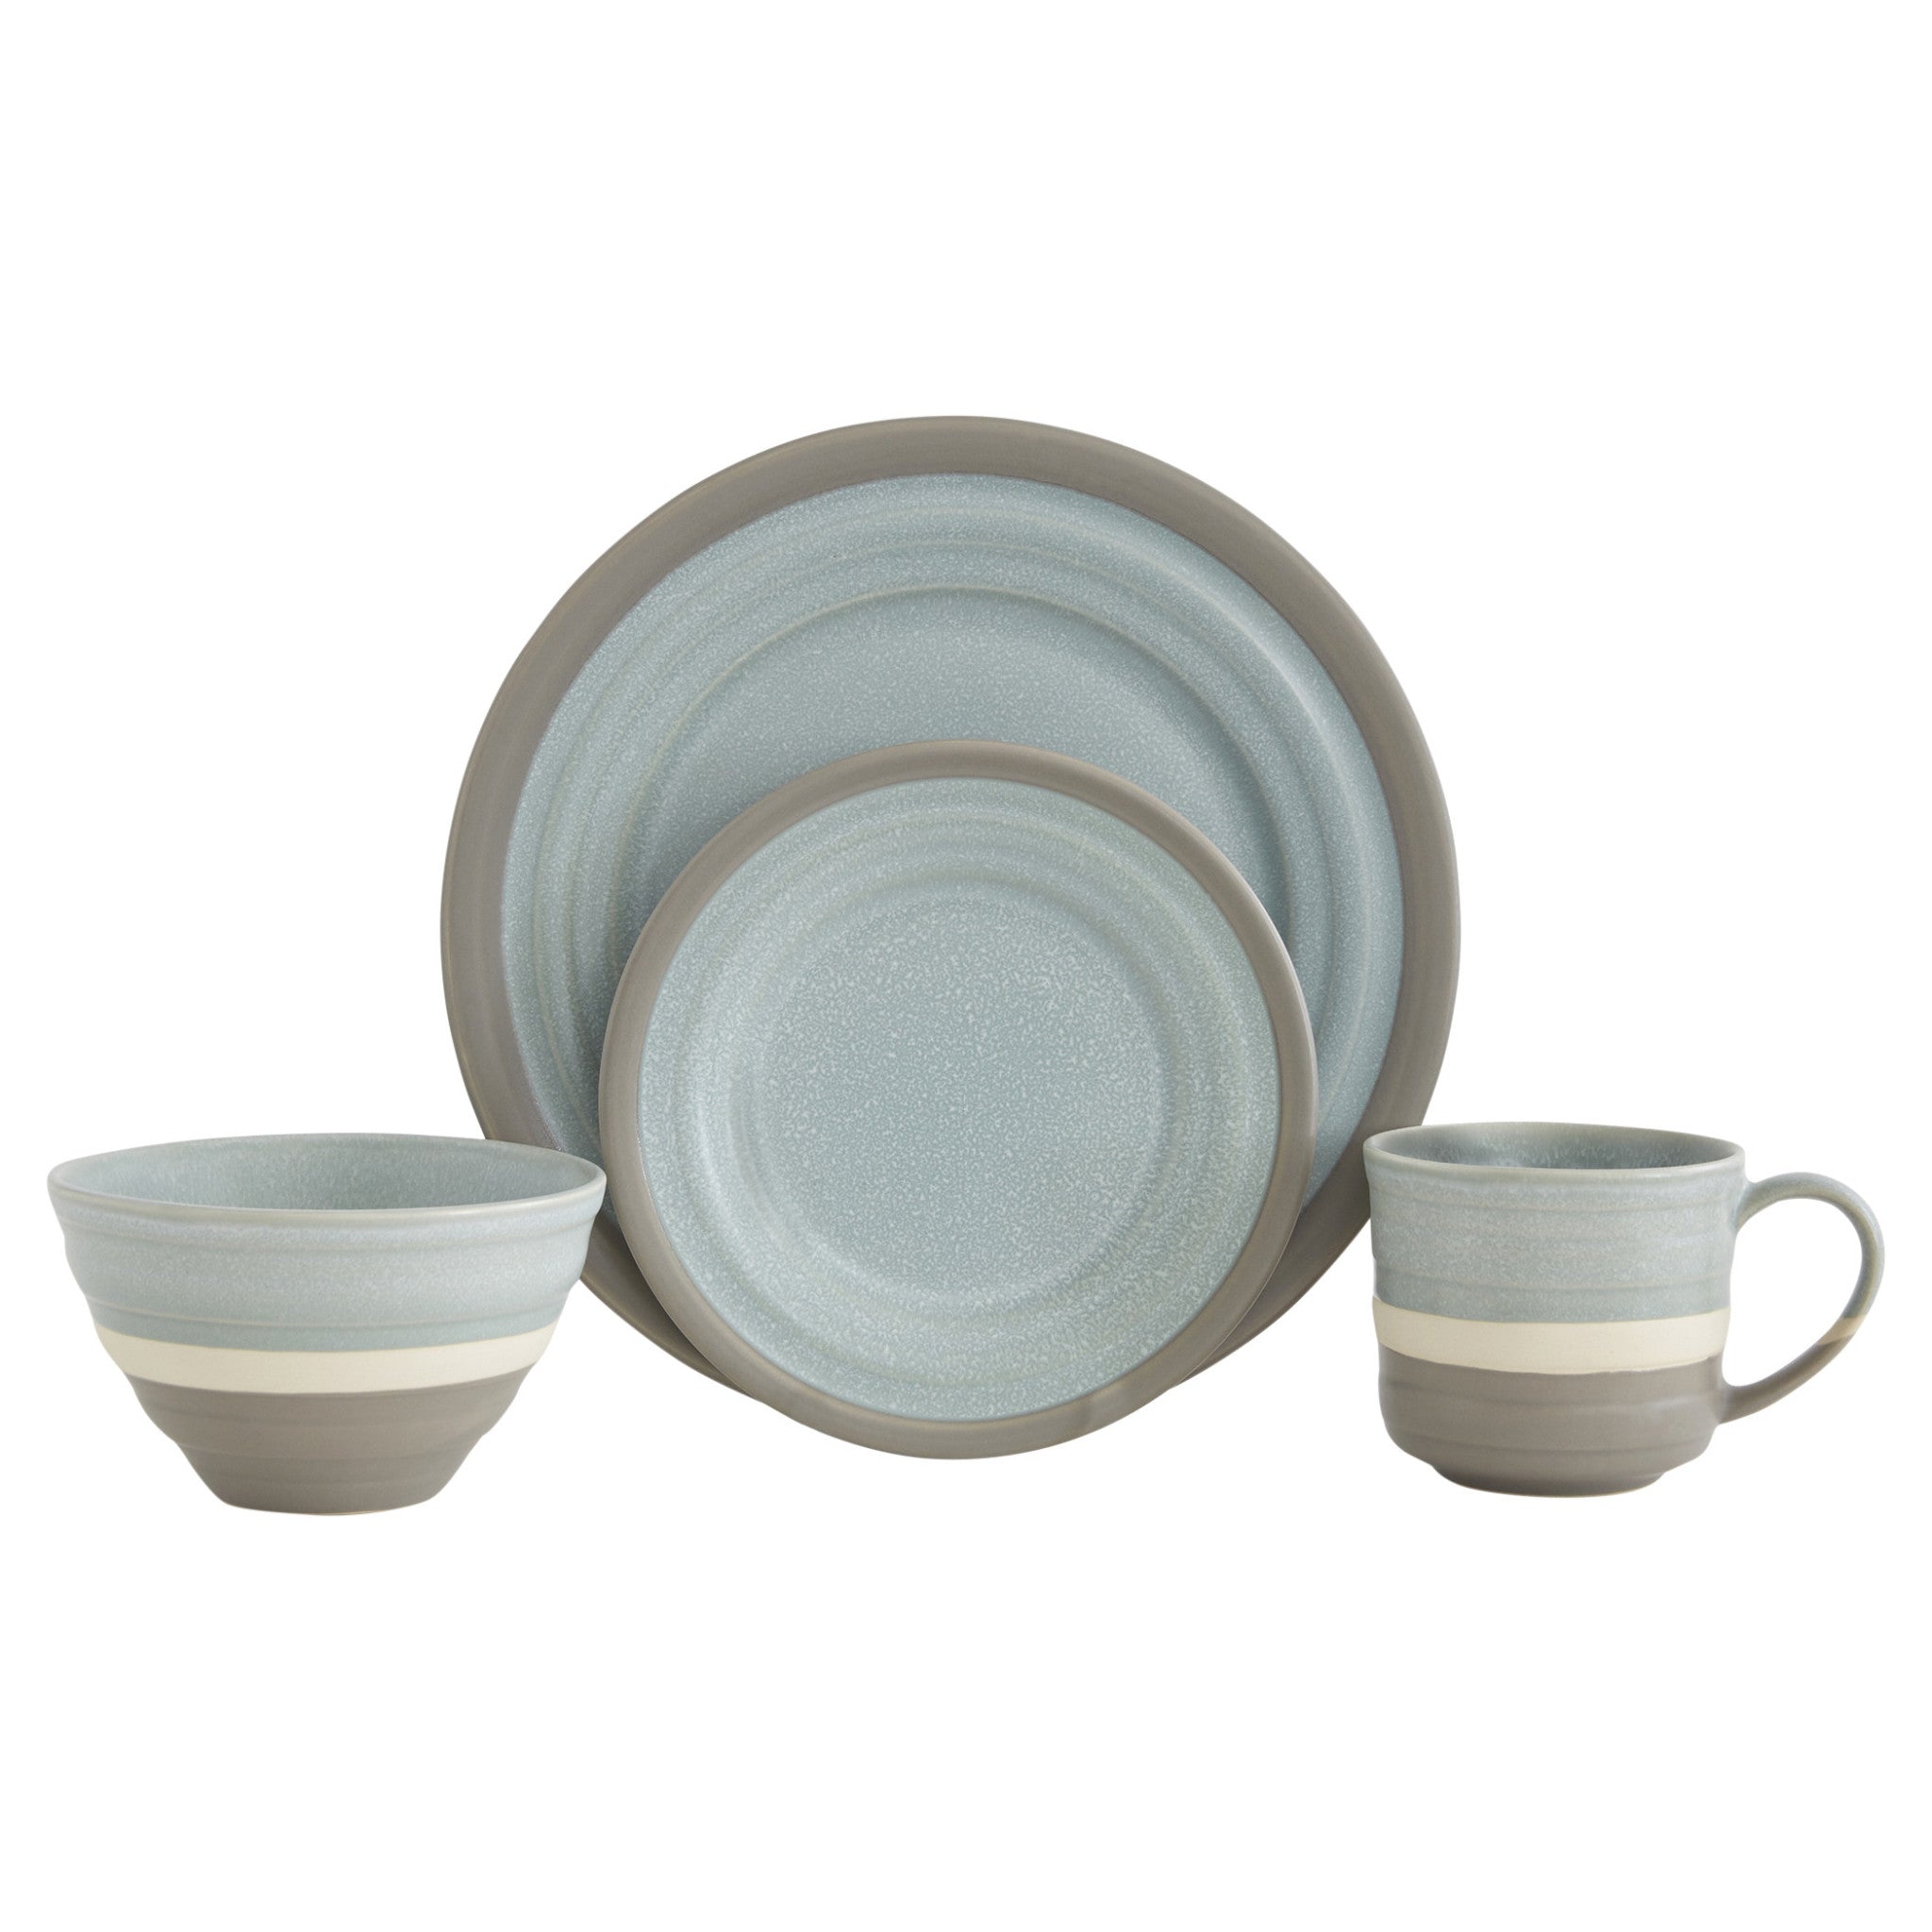 Blue-and-Gray-Sixteen-Piece-Round-Tone-on-Tone-Ceramic-Service-For-Four-Dinnerware-Set-Dinnerware-Sets